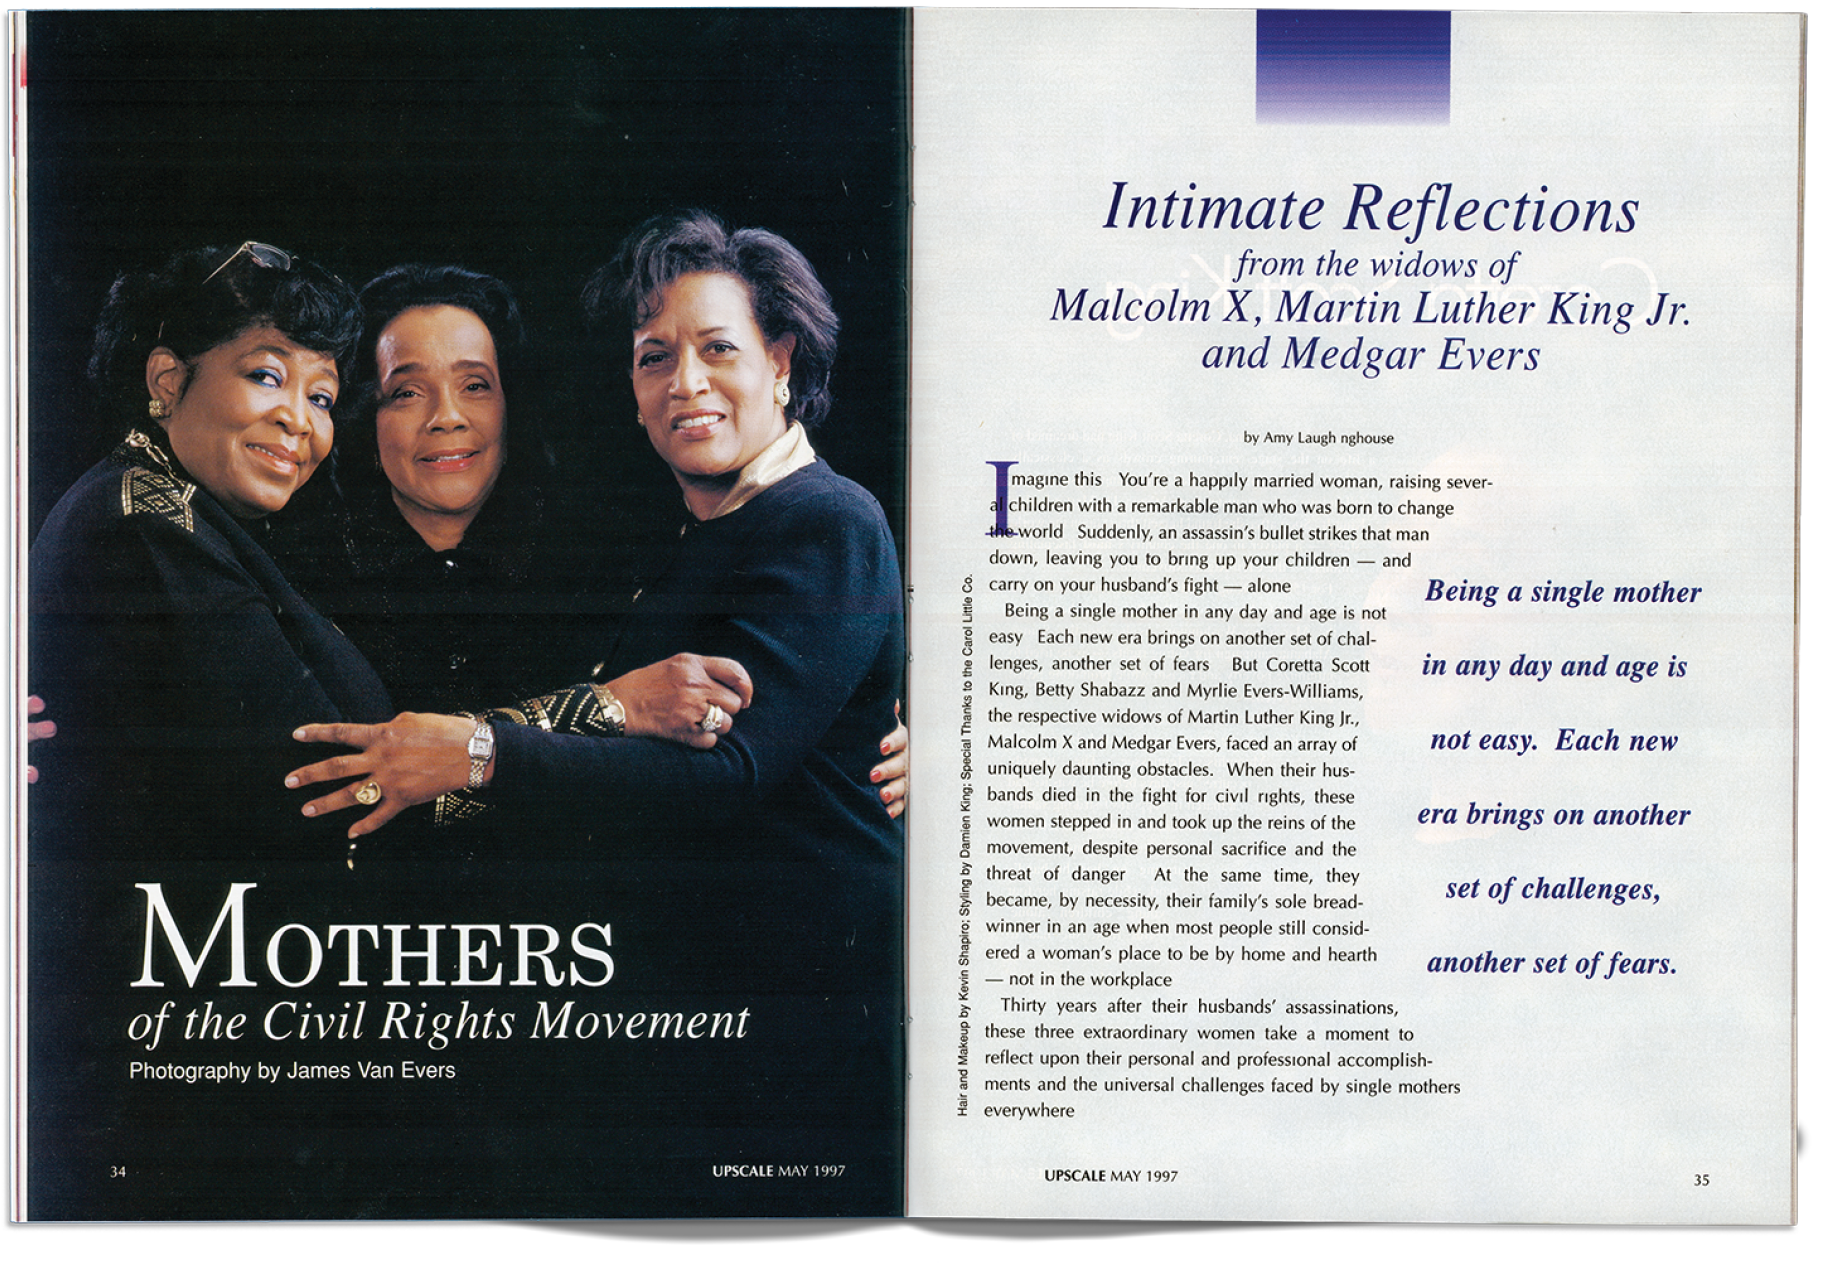 Portrait of Betty Shabazz, Coretta Scott King and Myrlie Evers-Williams, at right, taken by her son, photographer James Van Evers. Accompanies an article in Upscale magazine (May 1997) about the widows of assassinated civil rights leaders Malcolm X, Martin Luther King Jr. and Medgar Evers.